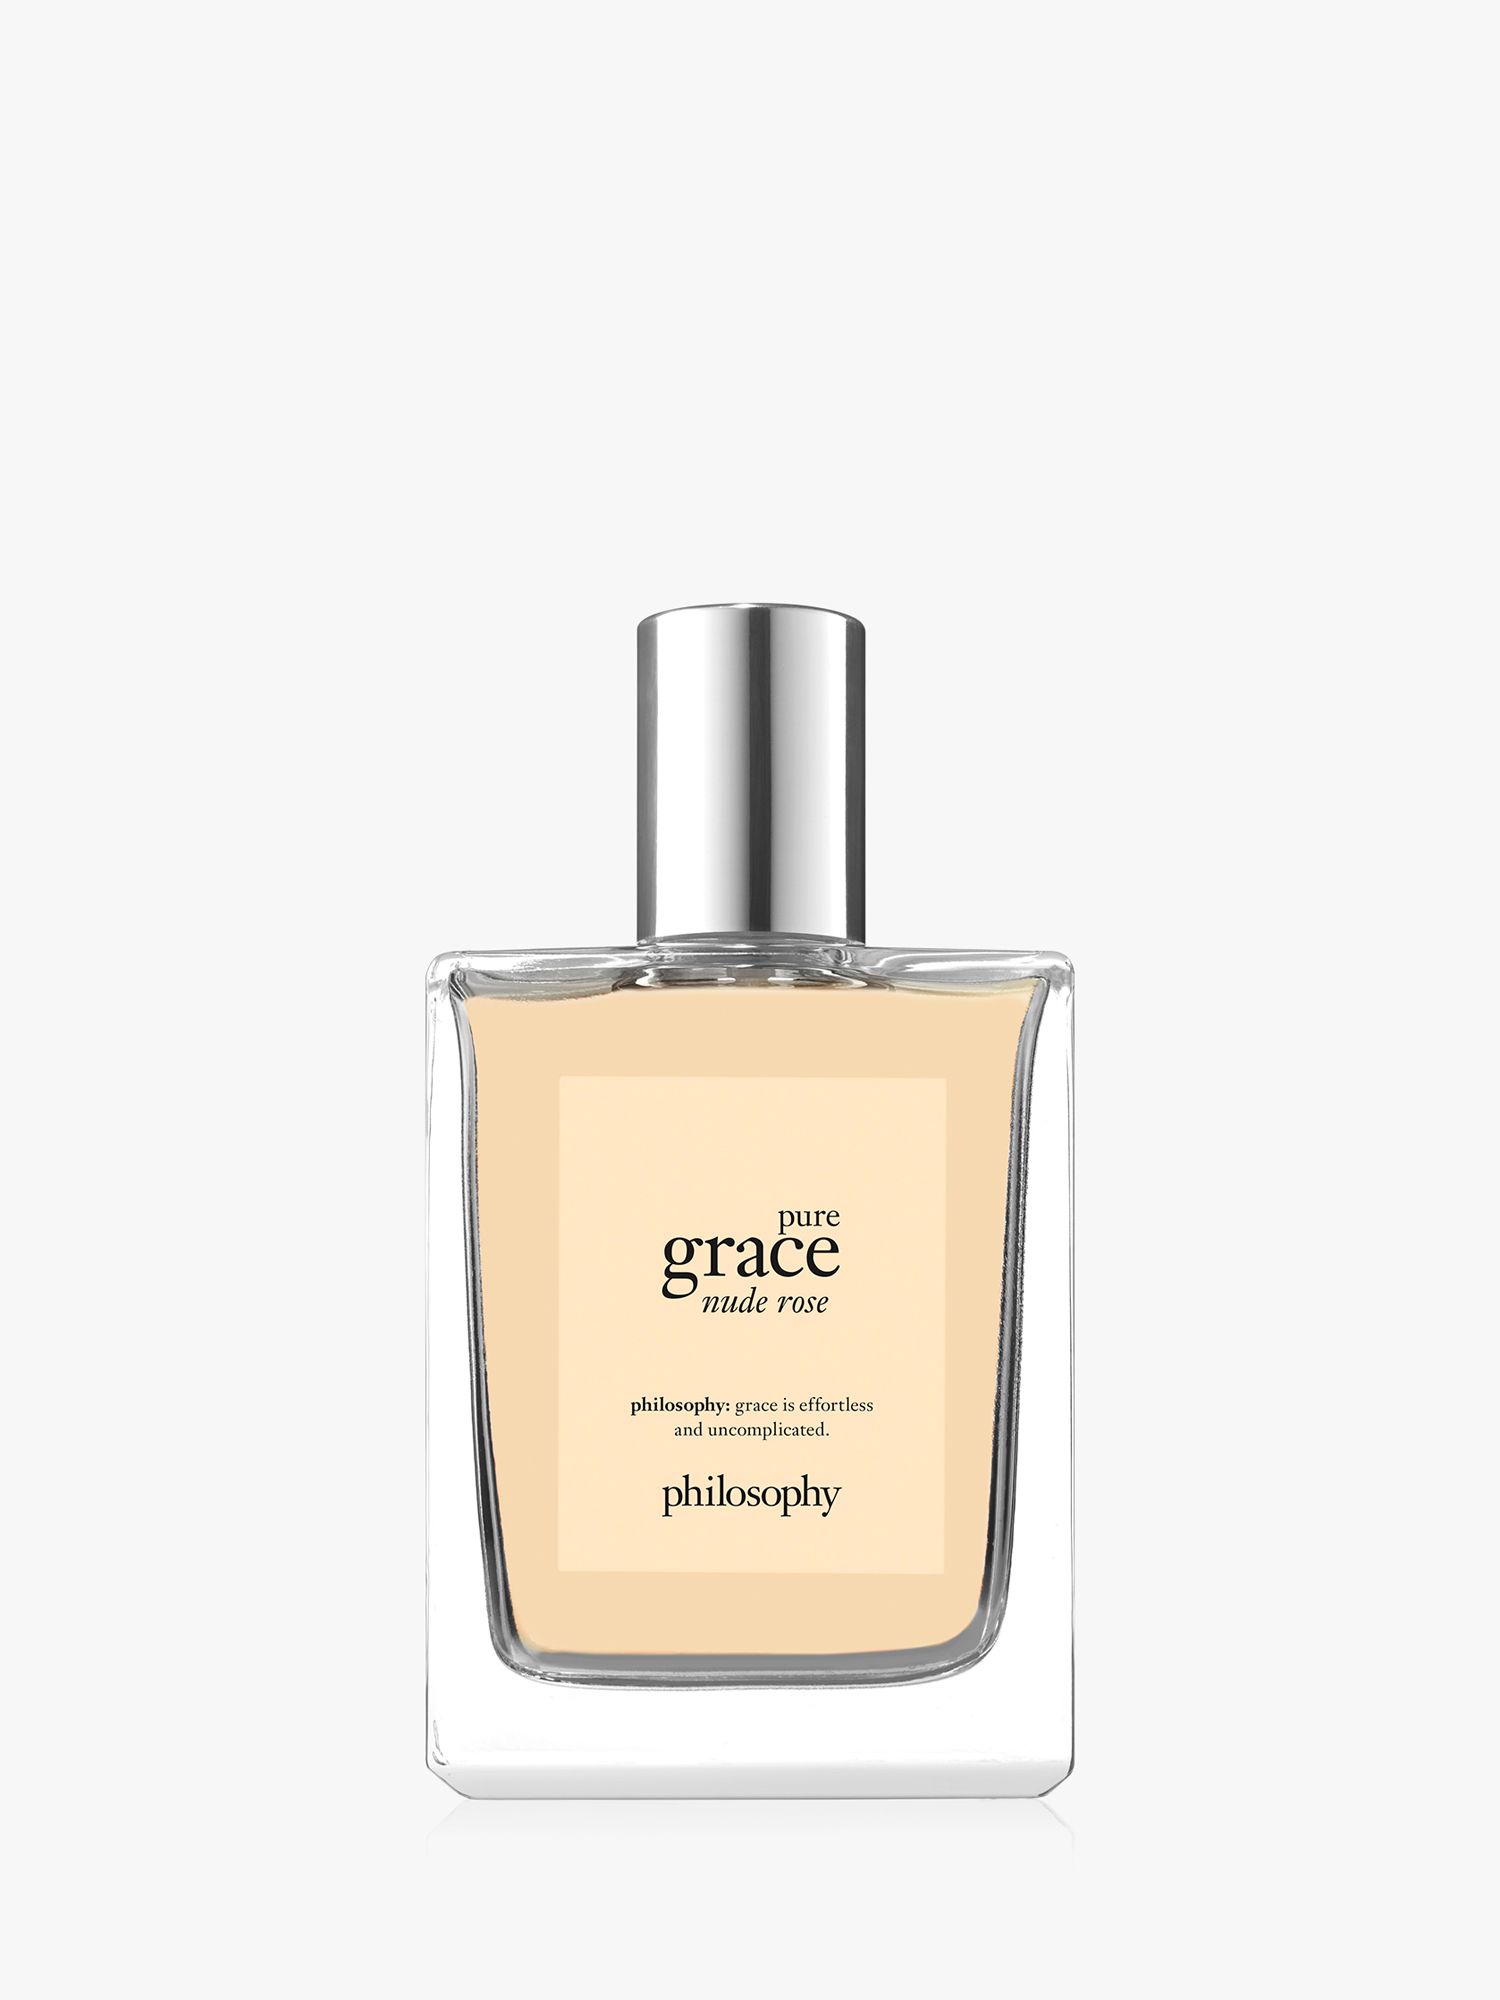 11 Best Zara Perfumes 2023 - The Ultimate Guide - Roxy's Guide